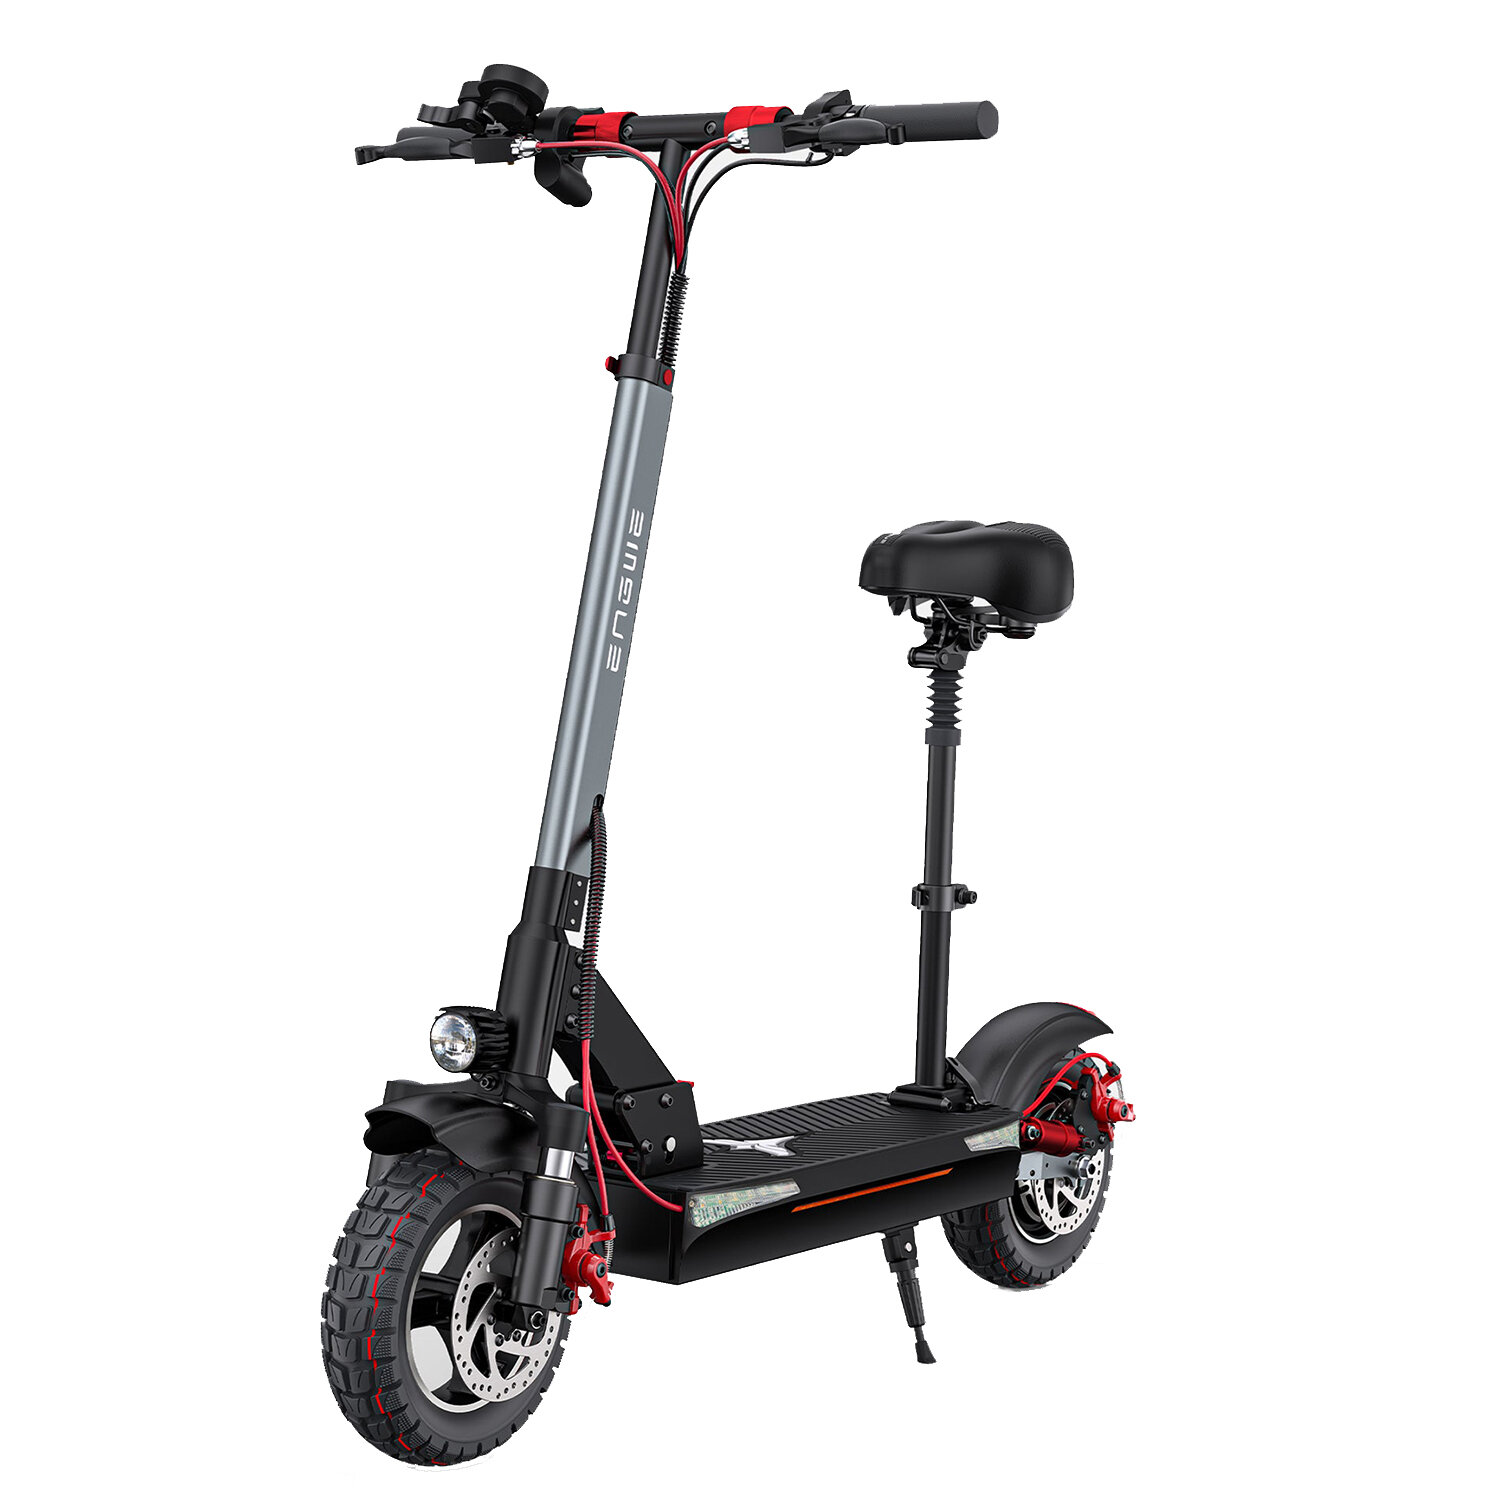 best price,engwe,y600,electric,scooter,18.2ah,48v,830w,10x4.0,inches,eu,discount